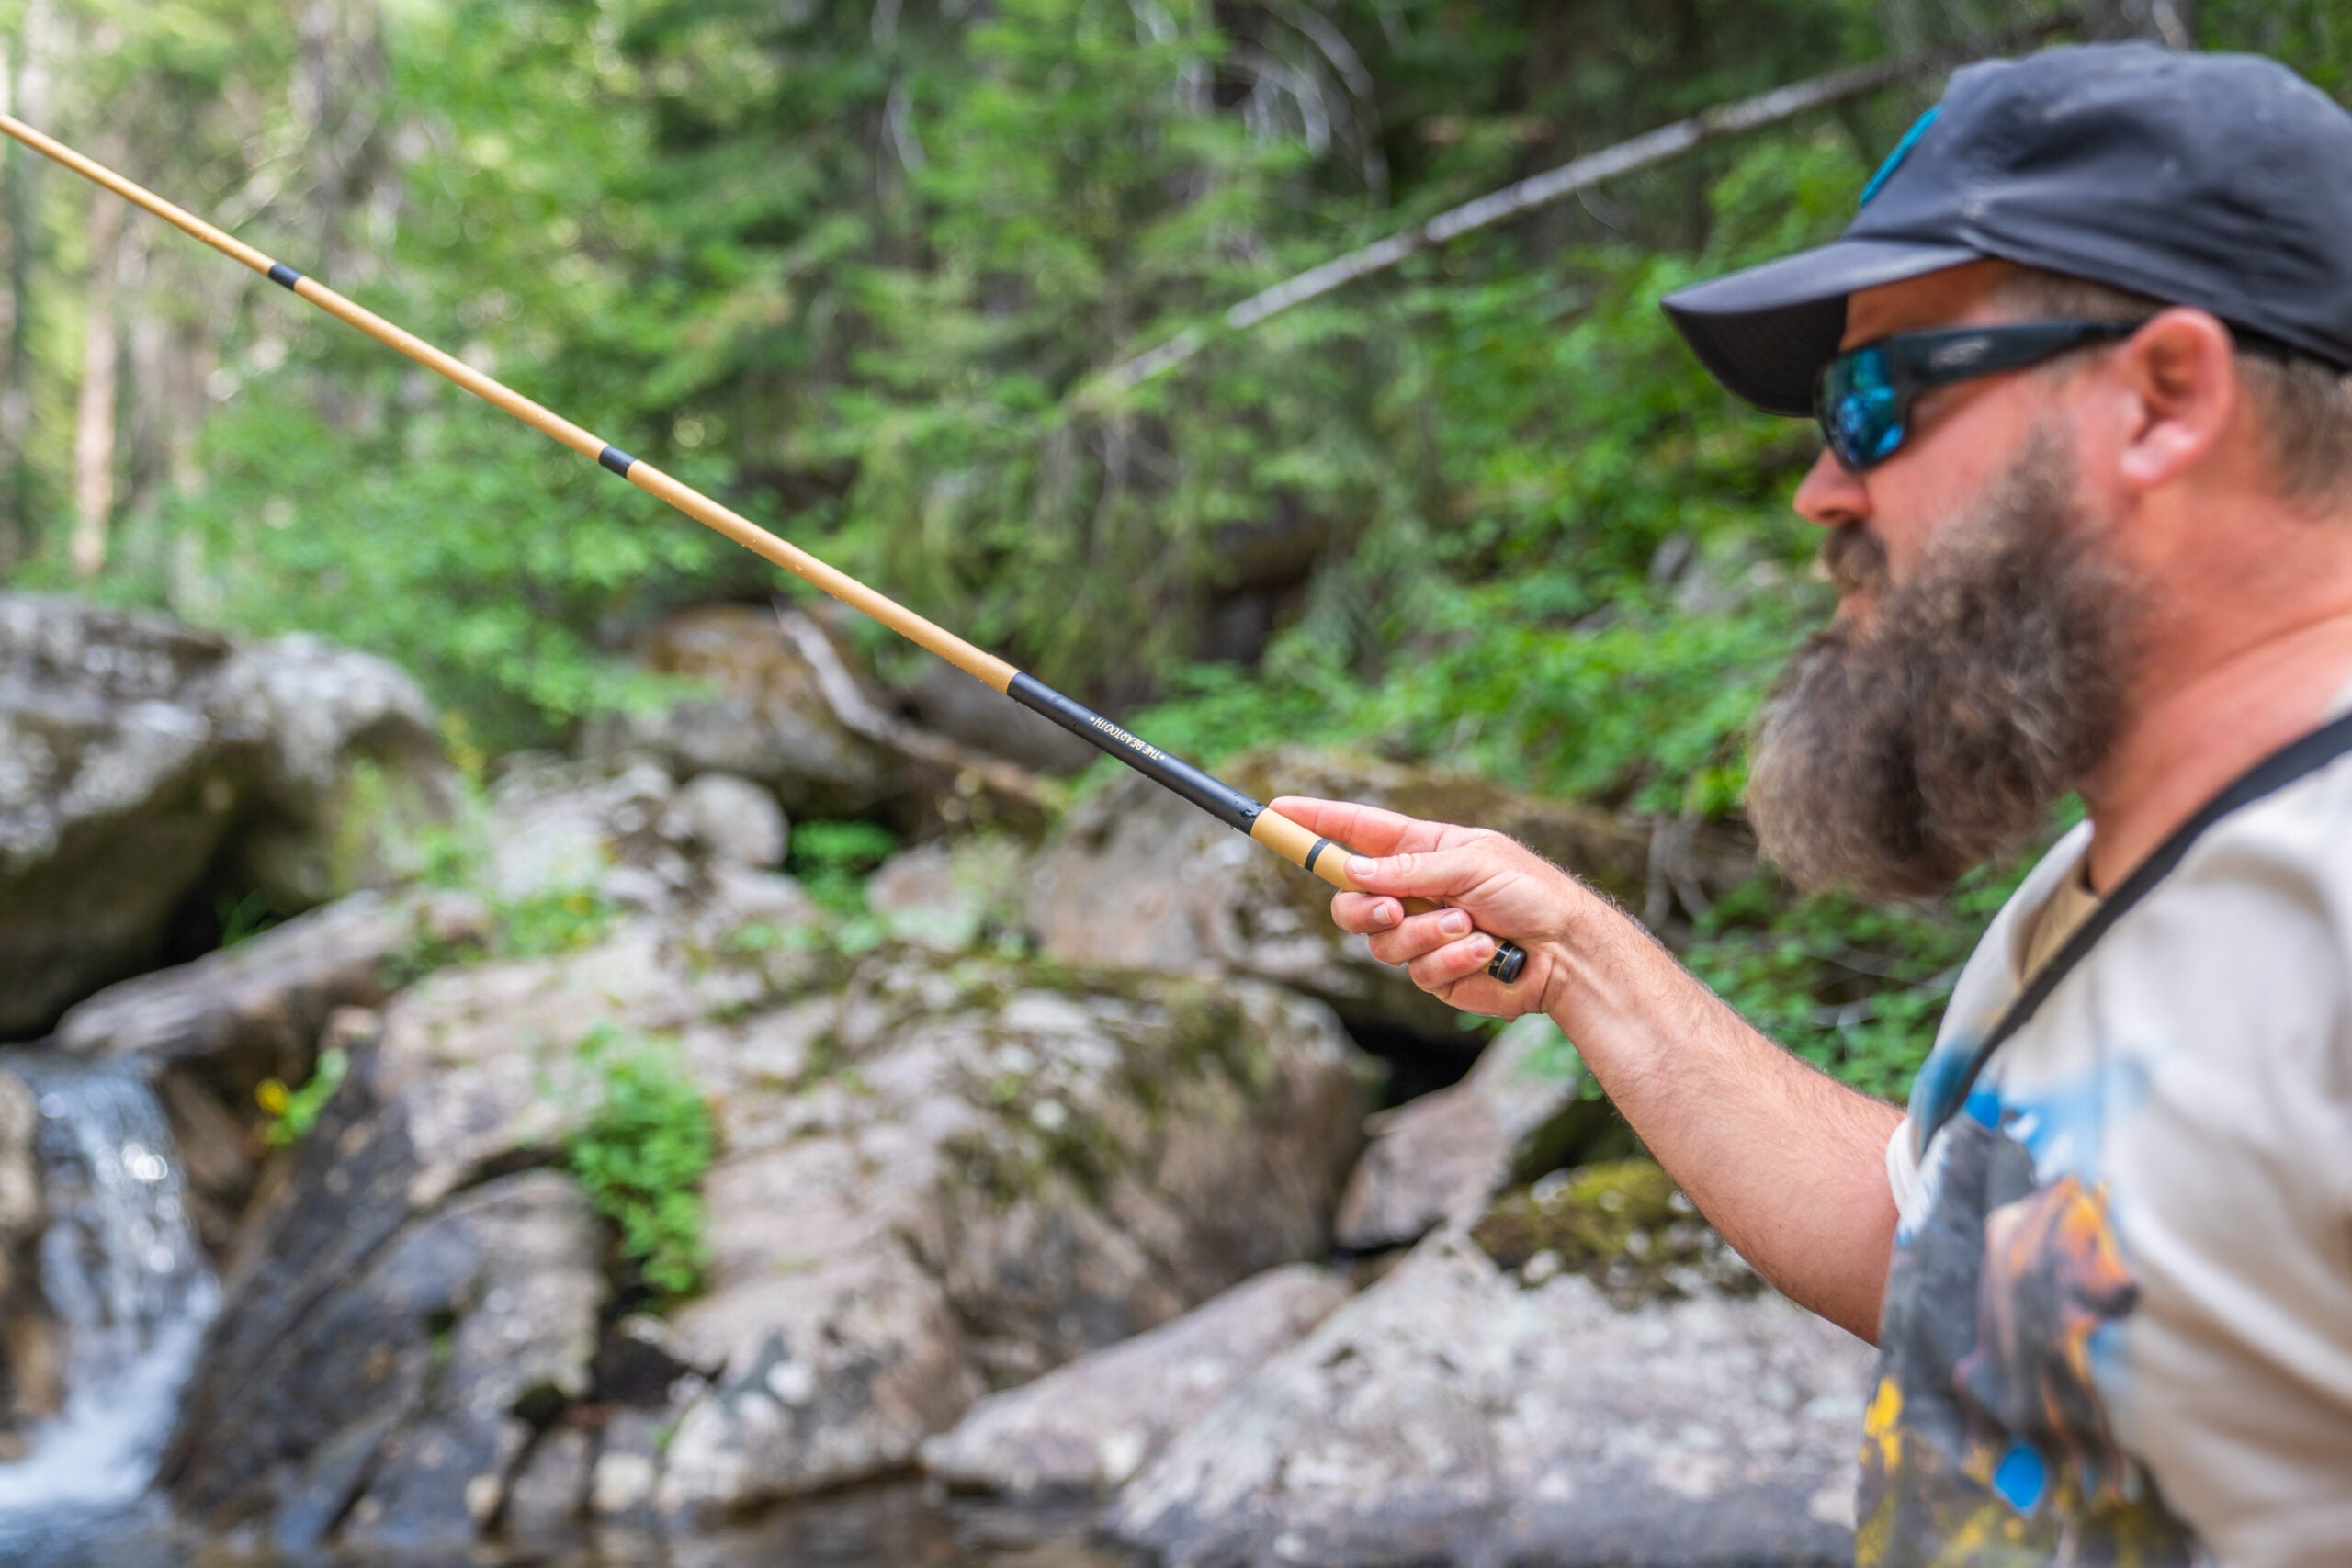 Anglers must use their hands to manage line when fishing with tenkara rods.